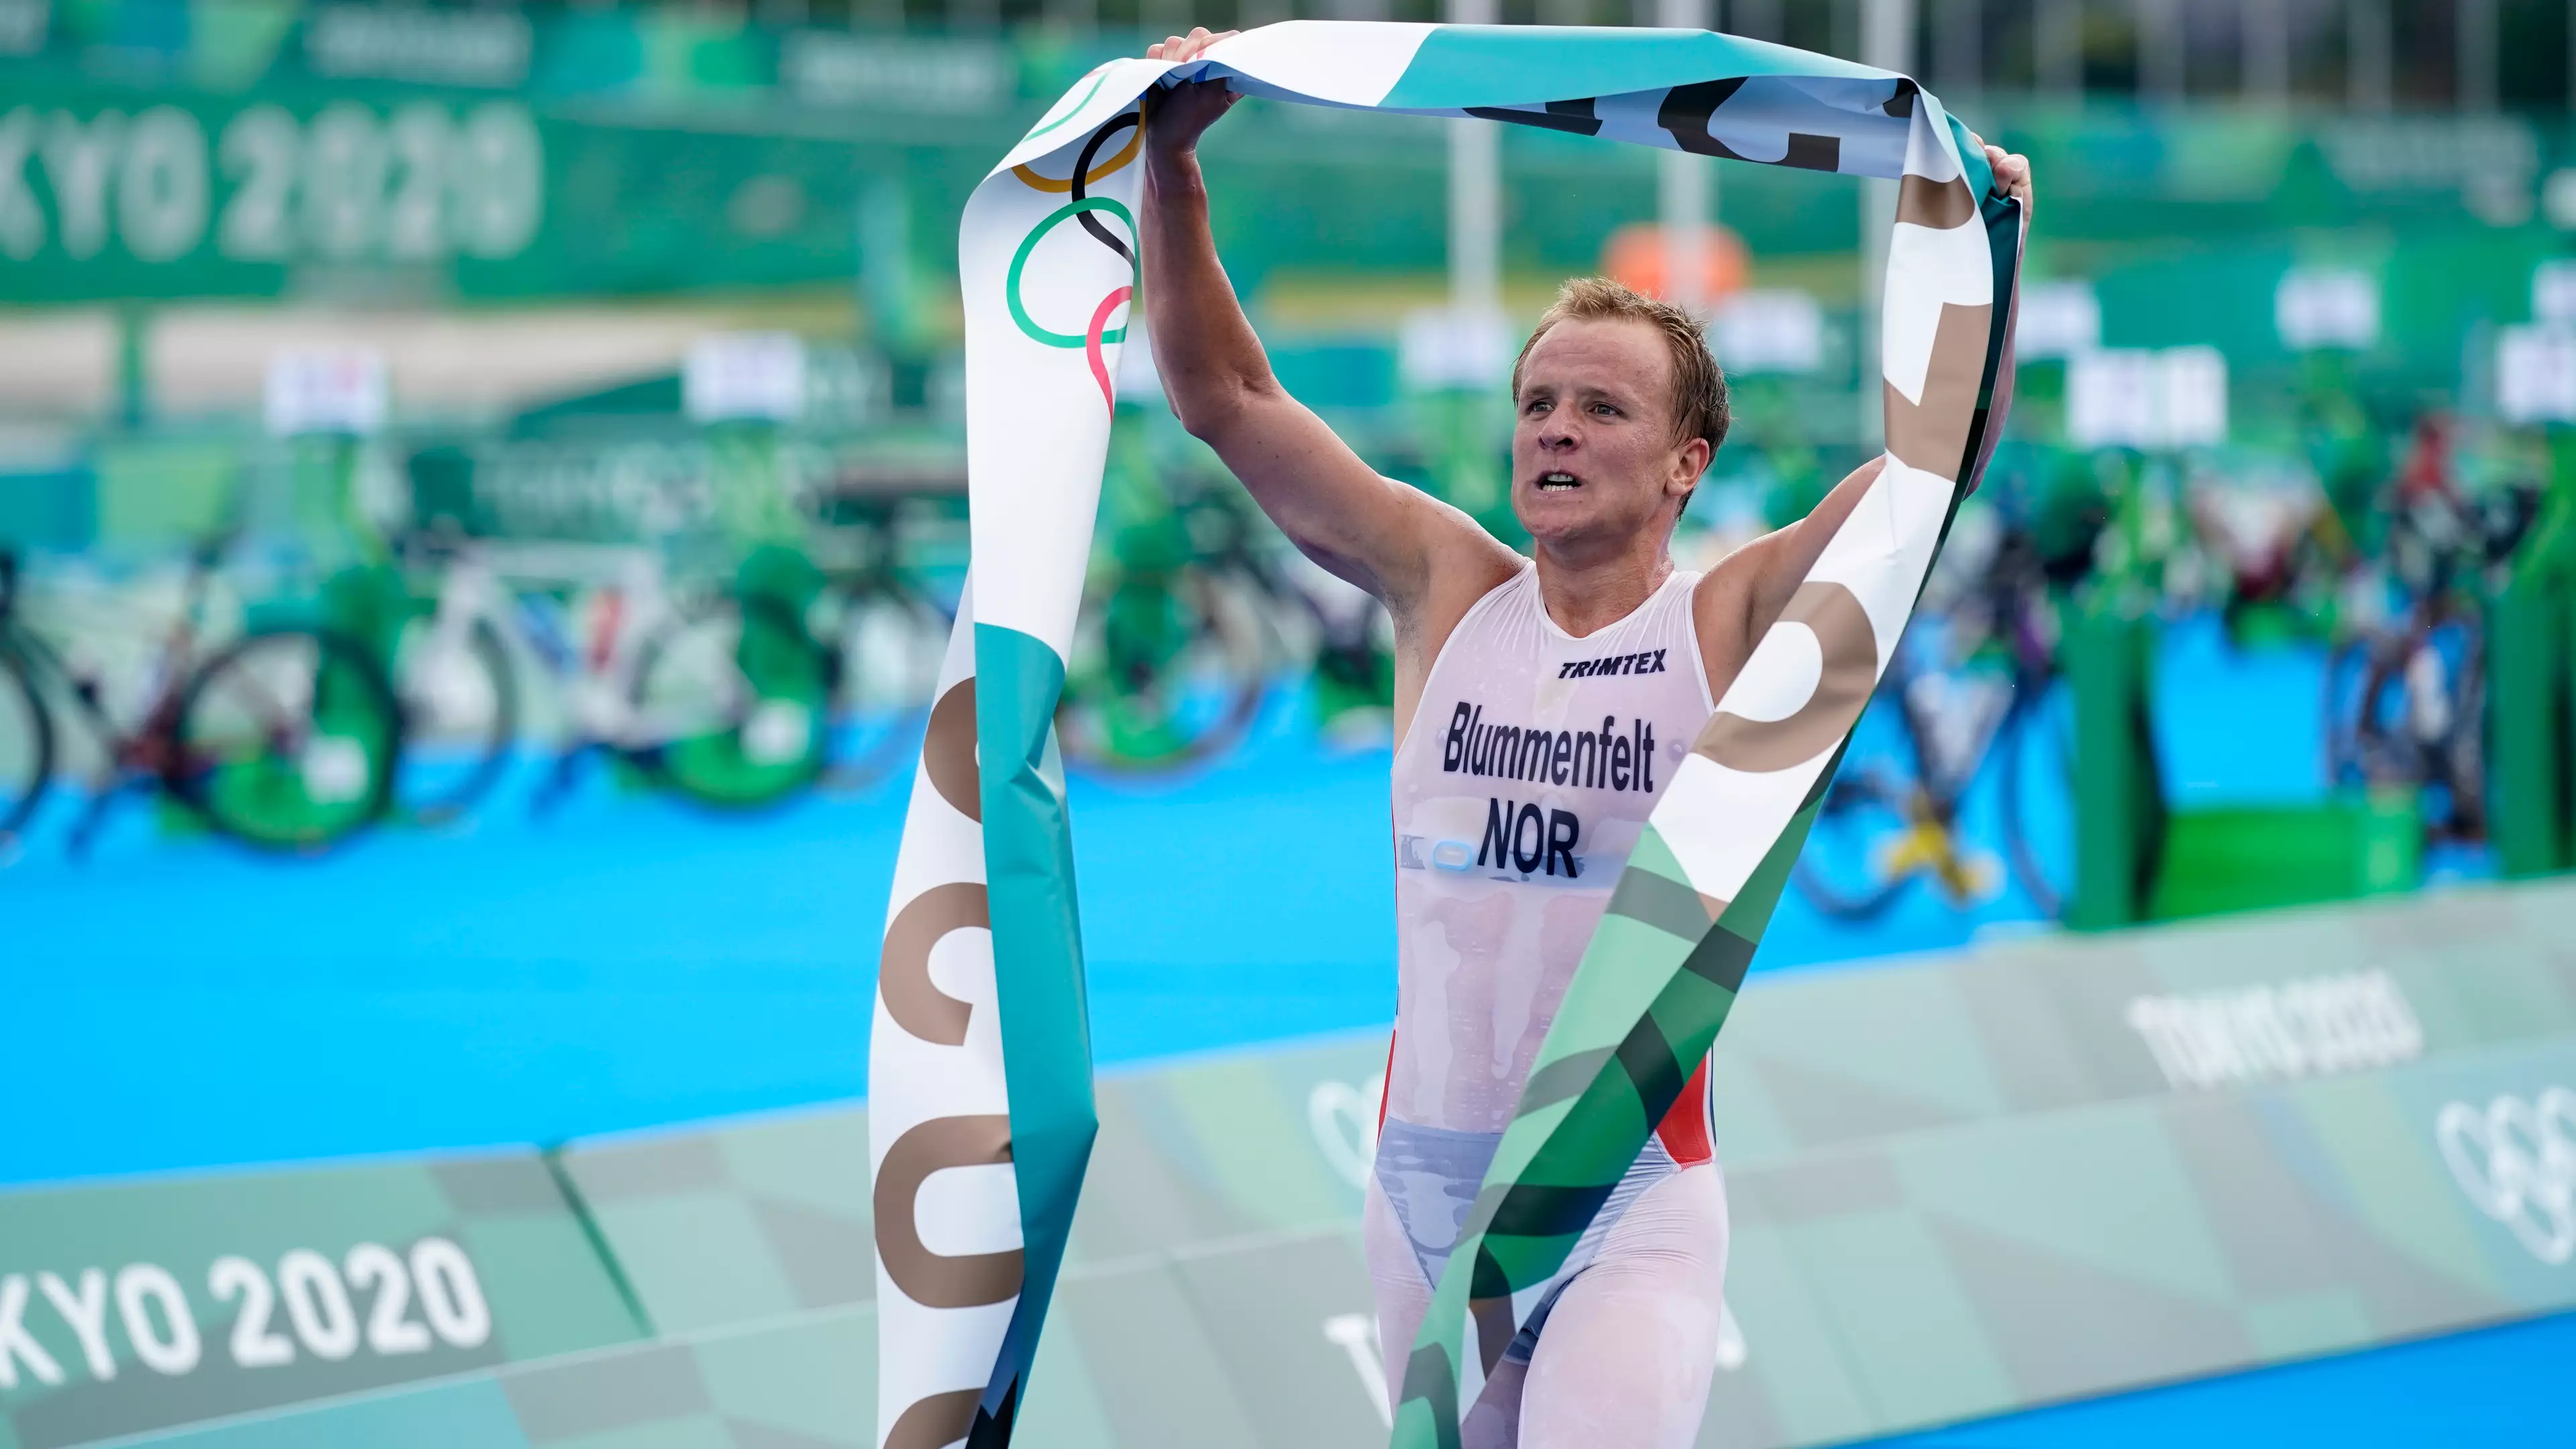 Triathlete Causes Controversy Wearing All White Costume At The Olympics